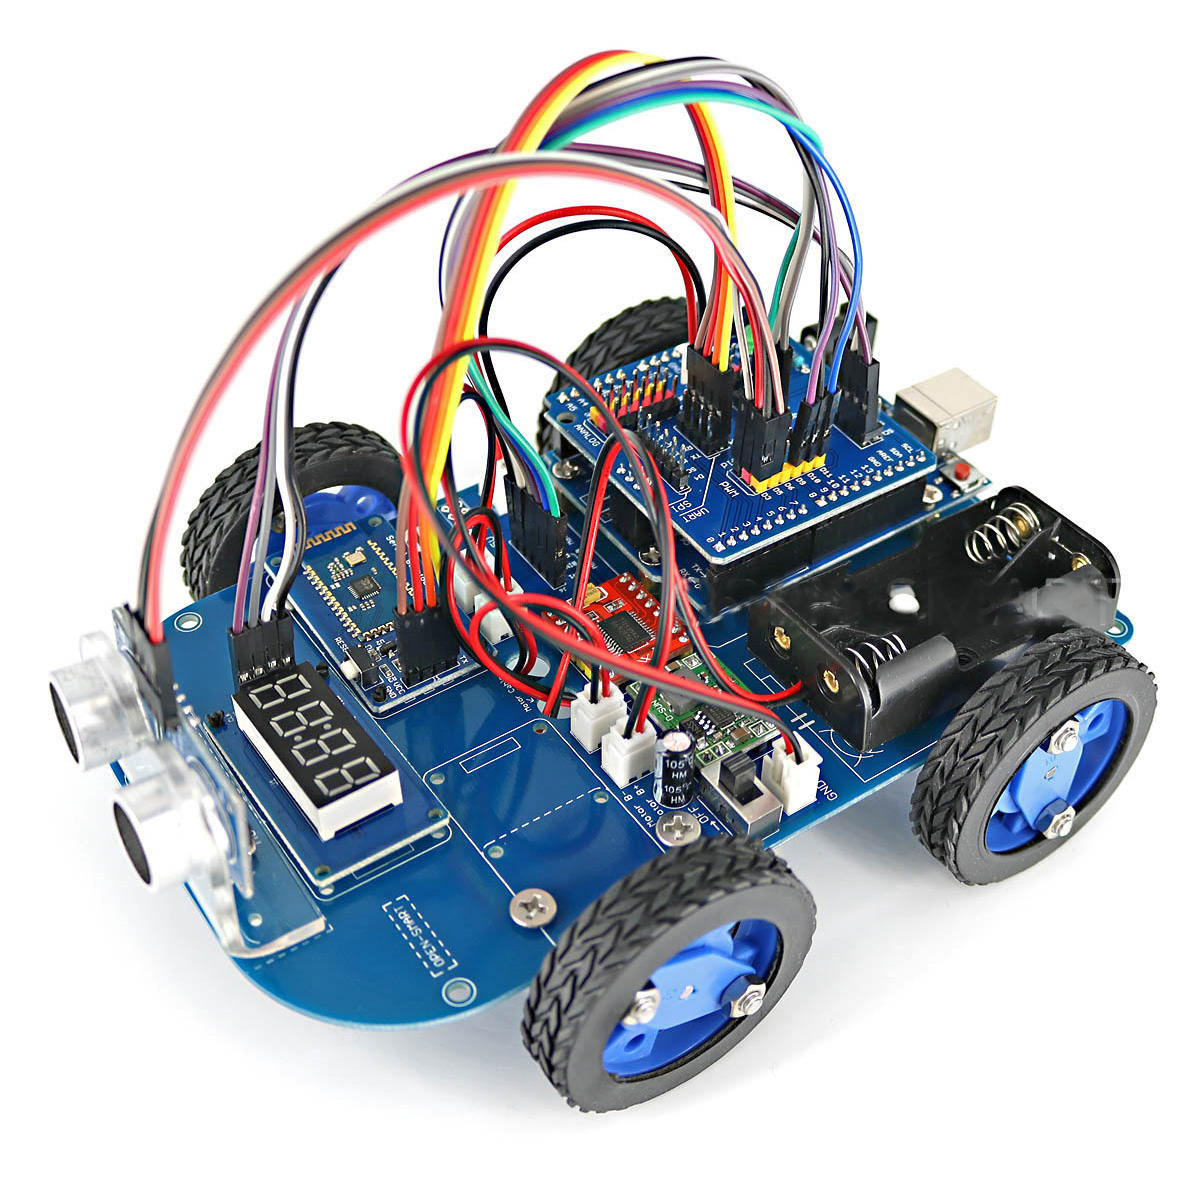 

4WD bluetooth Control Smart Robot Car Kit with Motherboard & N20 Gear Motor for Arduino UNO R3 Nano